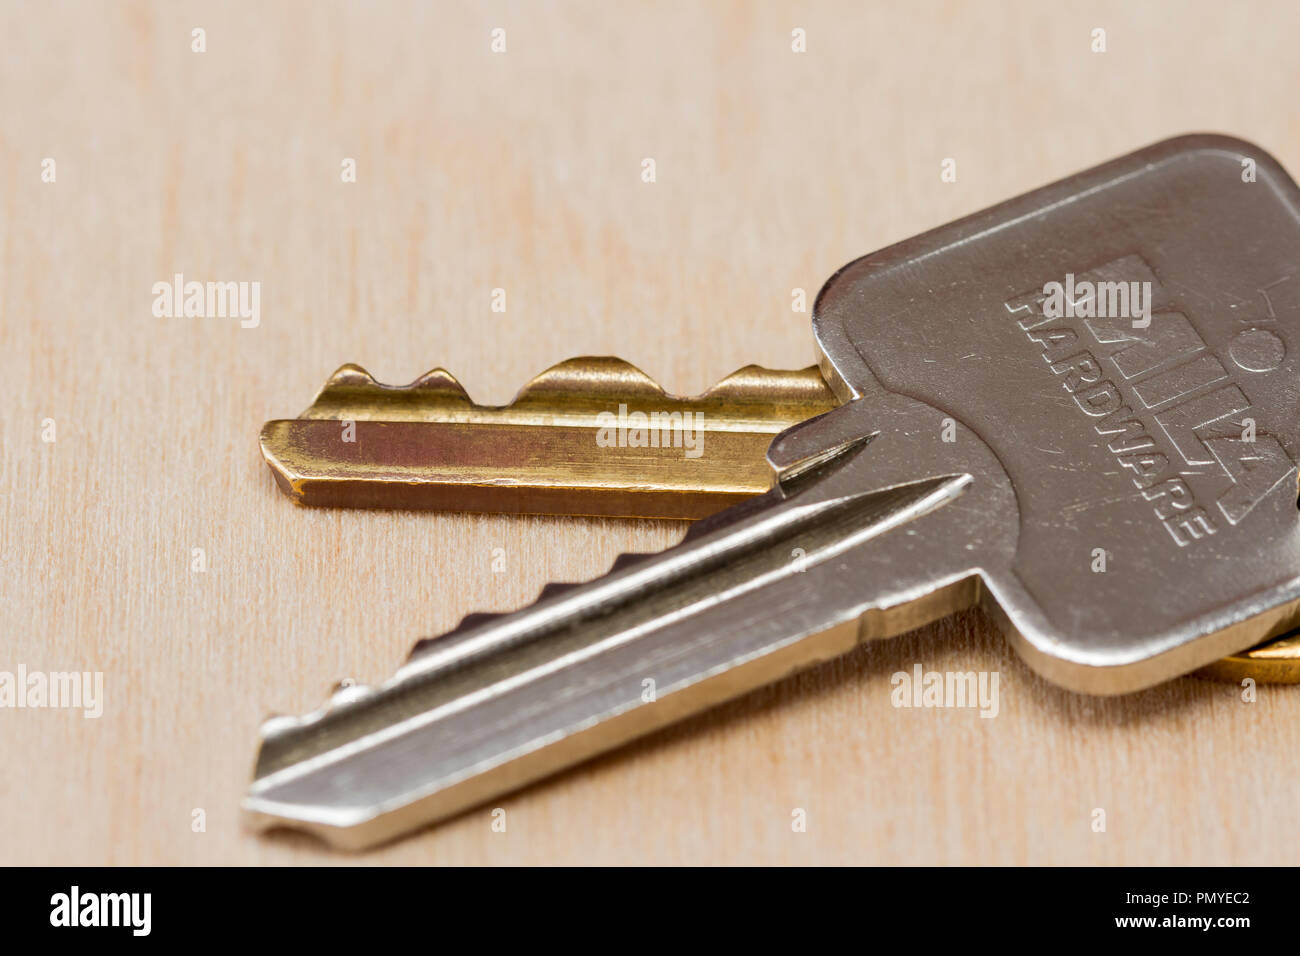 Two keys close up on a light wood background Stock Photo